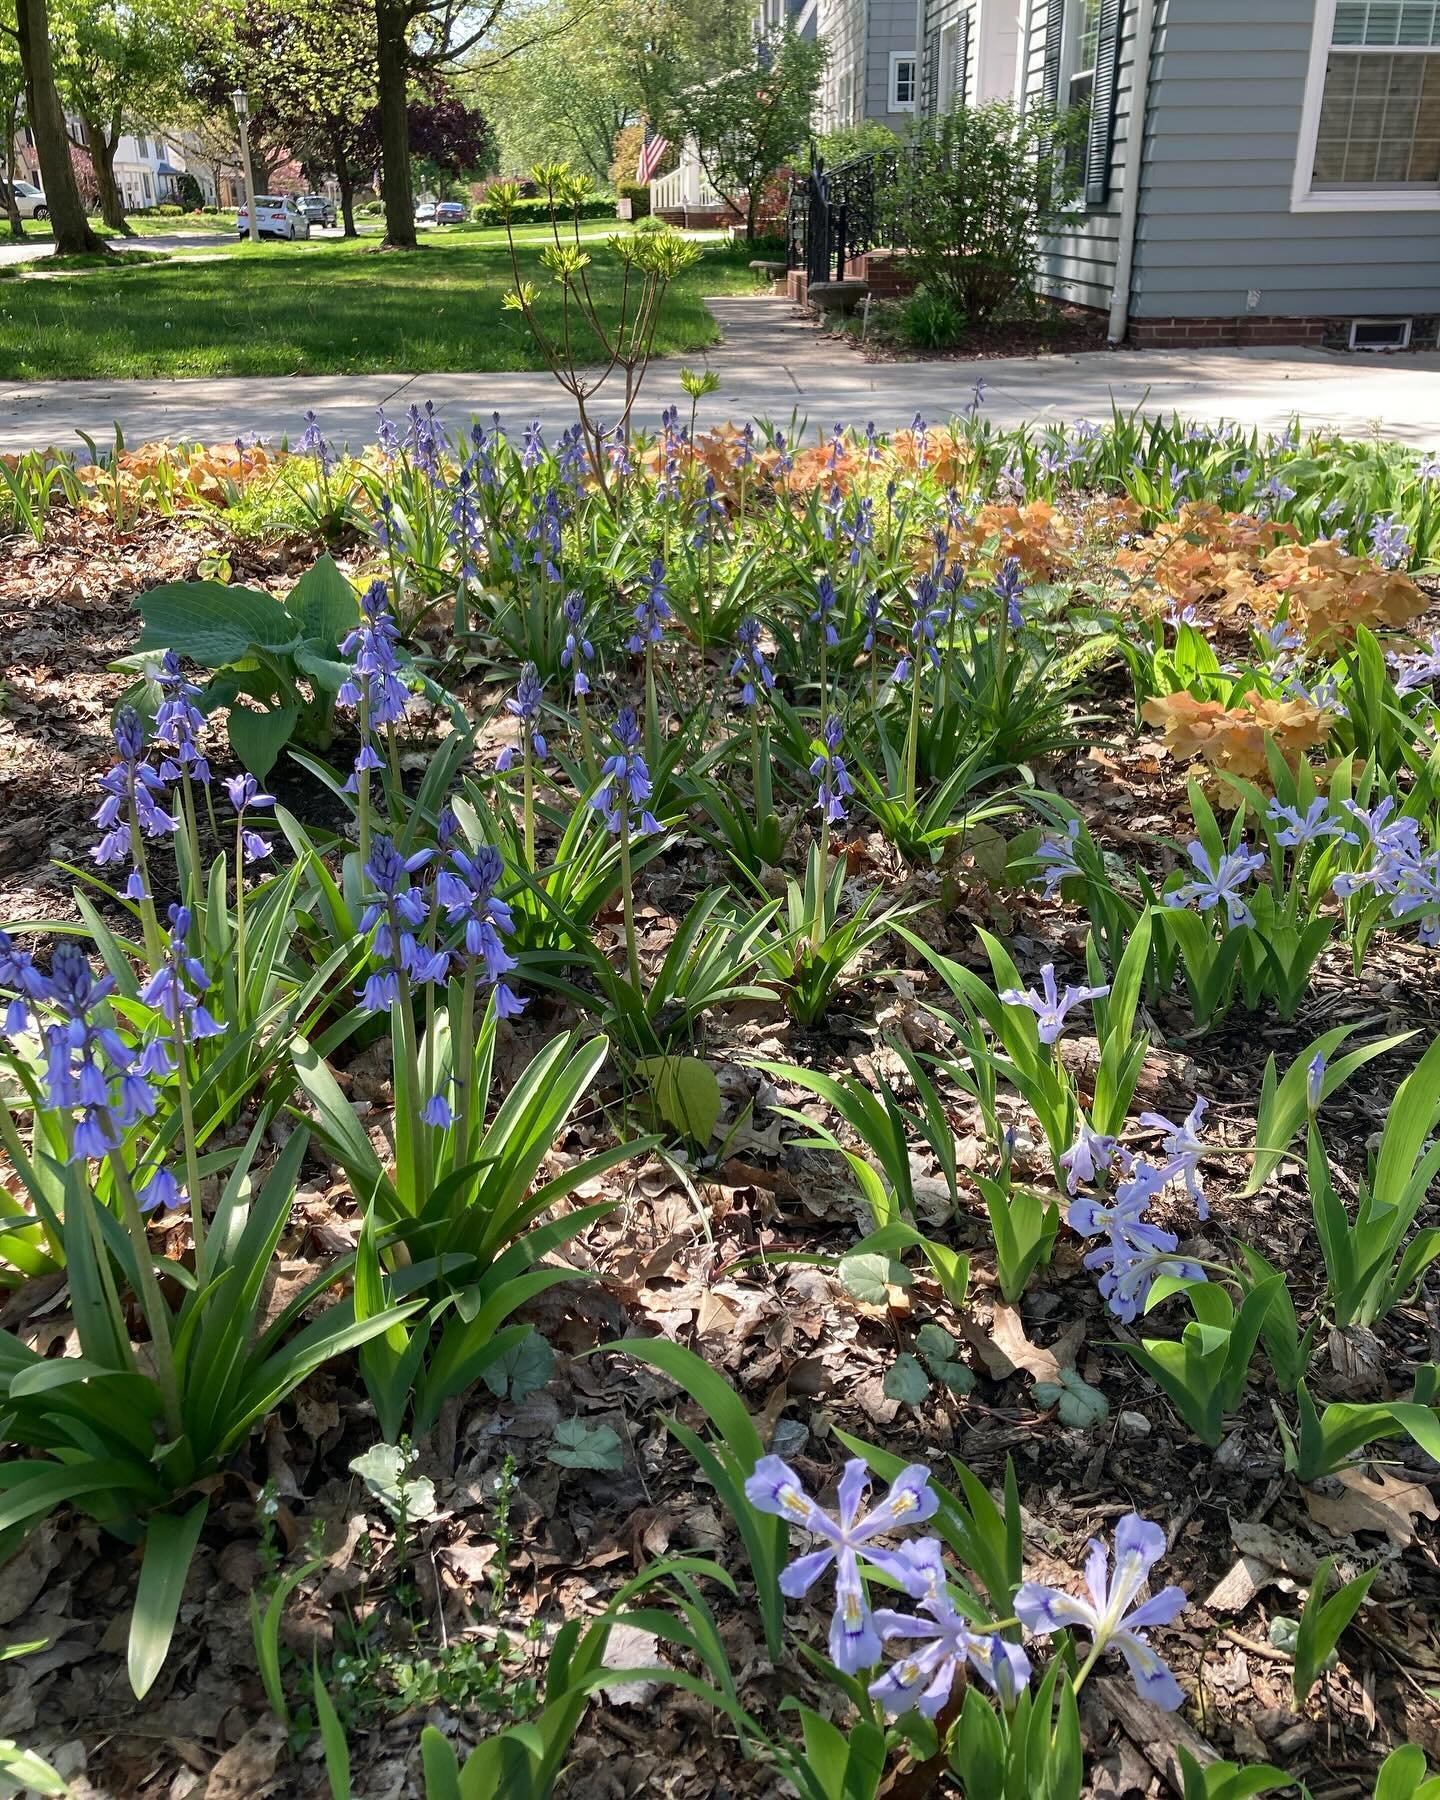 Front shade garden is starting to come together&hellip; perennials are slow to establish in competition with the sugar maple roots, but we&rsquo;re getting there. Iris cristata, Heuchera &lsquo;Caramel&rsquo;, and Spanish bluebells are the stars at t